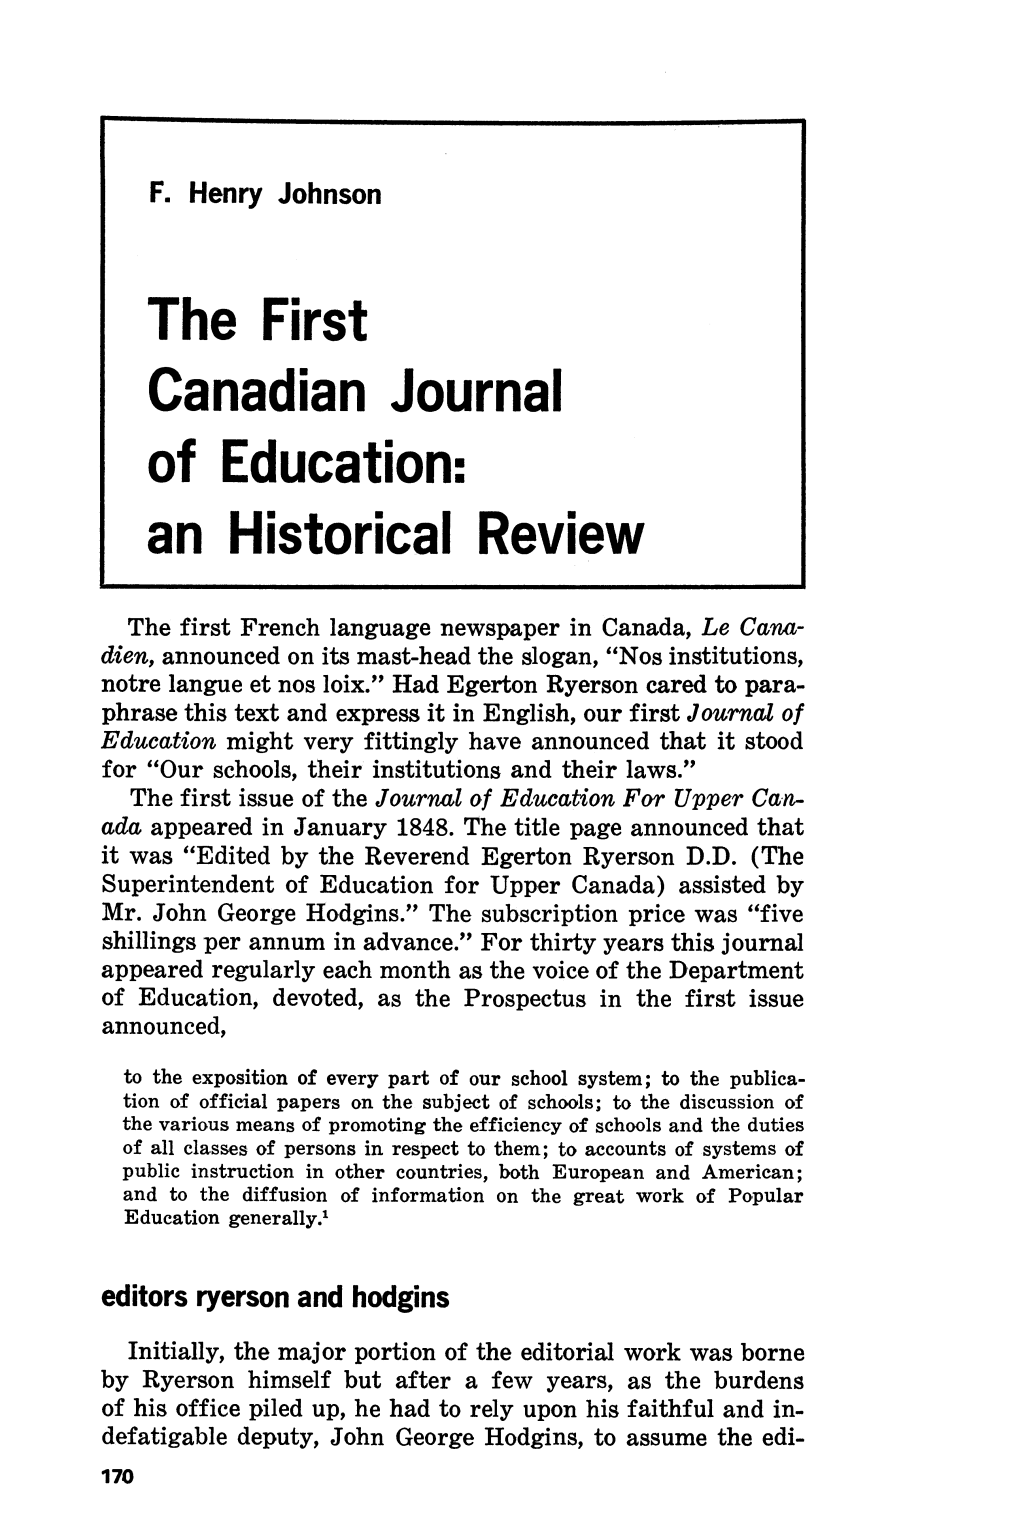 The First Canadian Journal of Education: an Historical Review